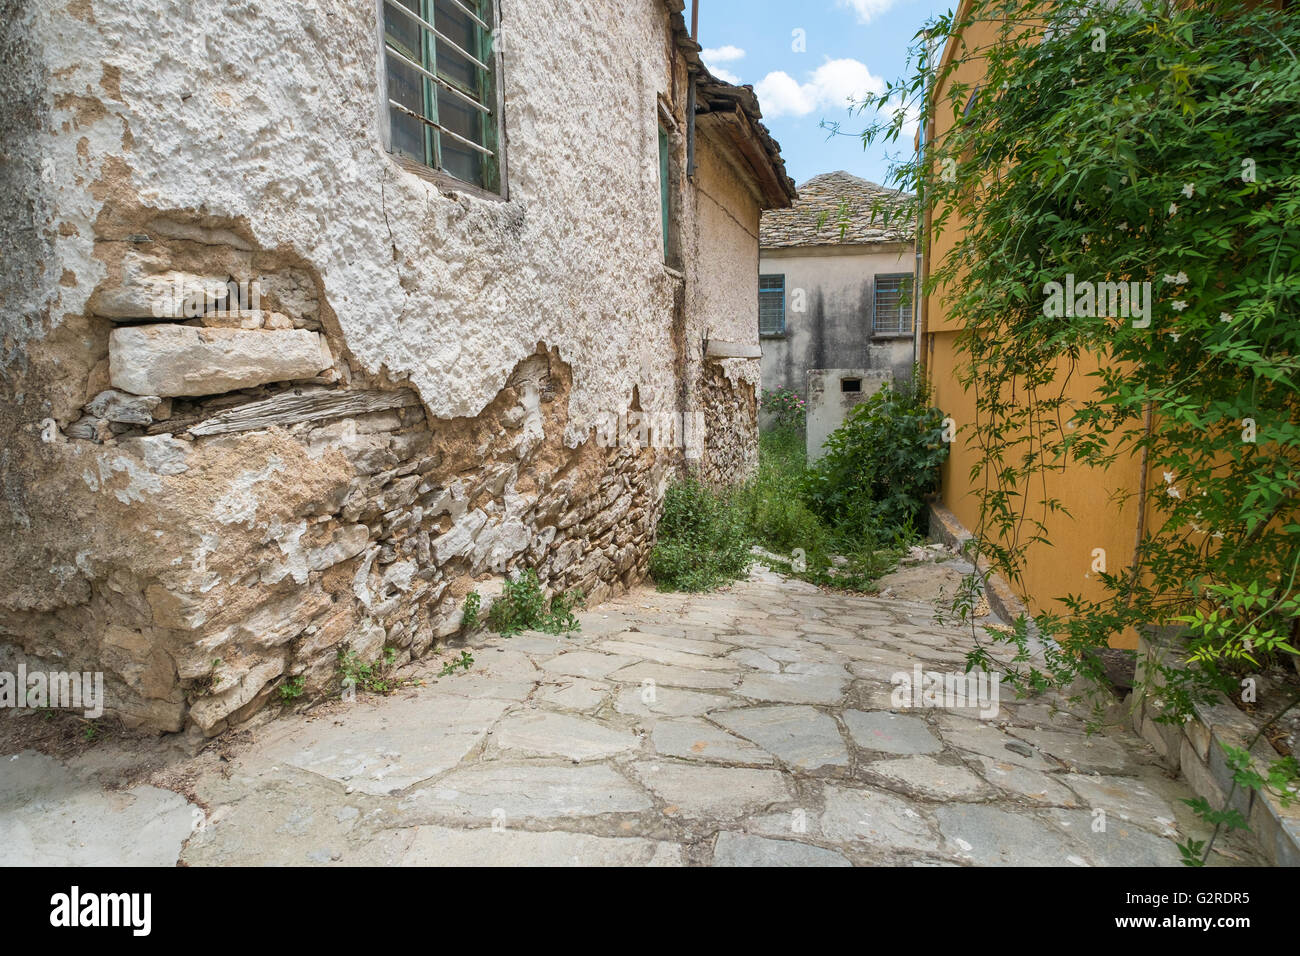 Alleyway in an old Greek town. Stock Photo